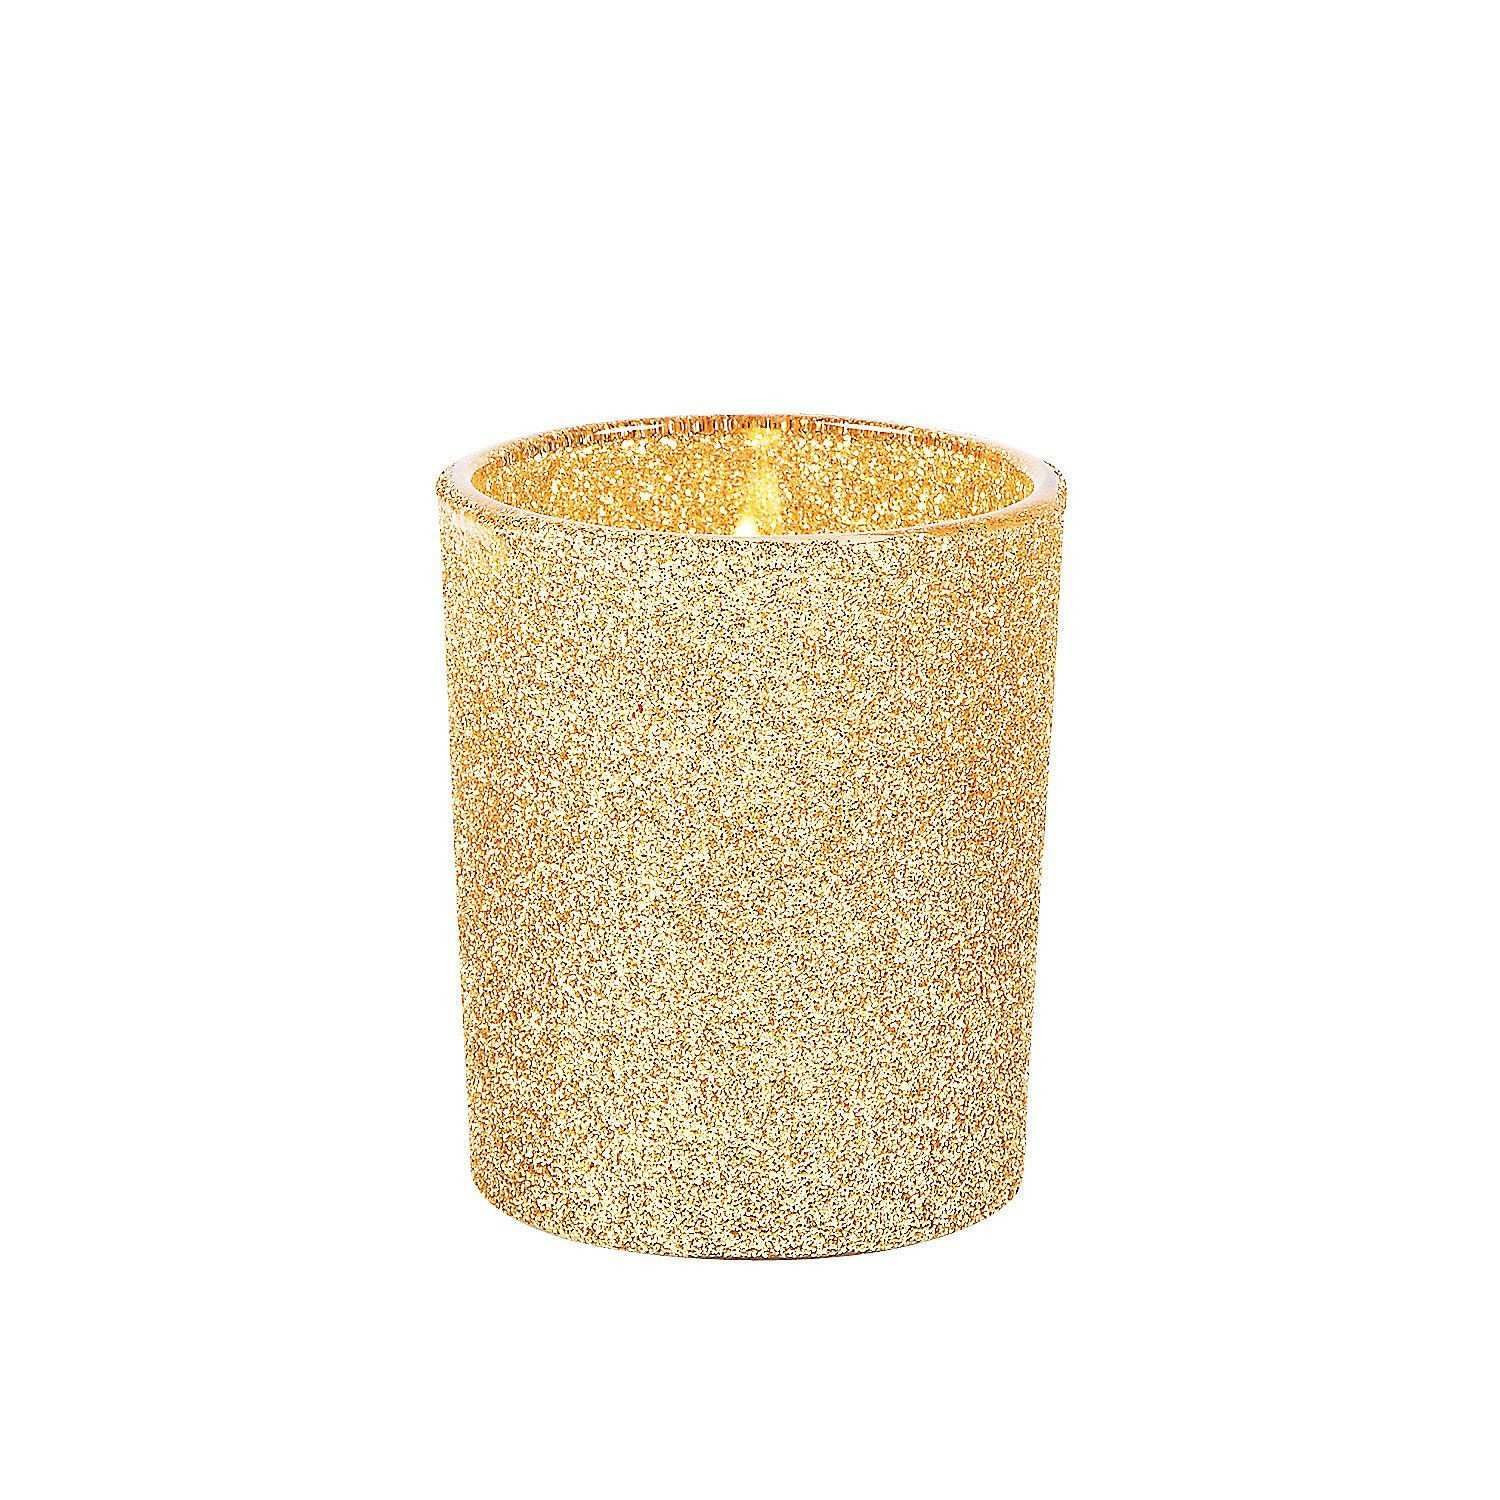 29 Unique Rent Mercury Glass Vases 2024 free download rent mercury glass vases of gold mercury glass vases awesome inspiration gold votive candles throughout gold mercury glass vases awesome inspiration gold votive candles with gold glitter vot